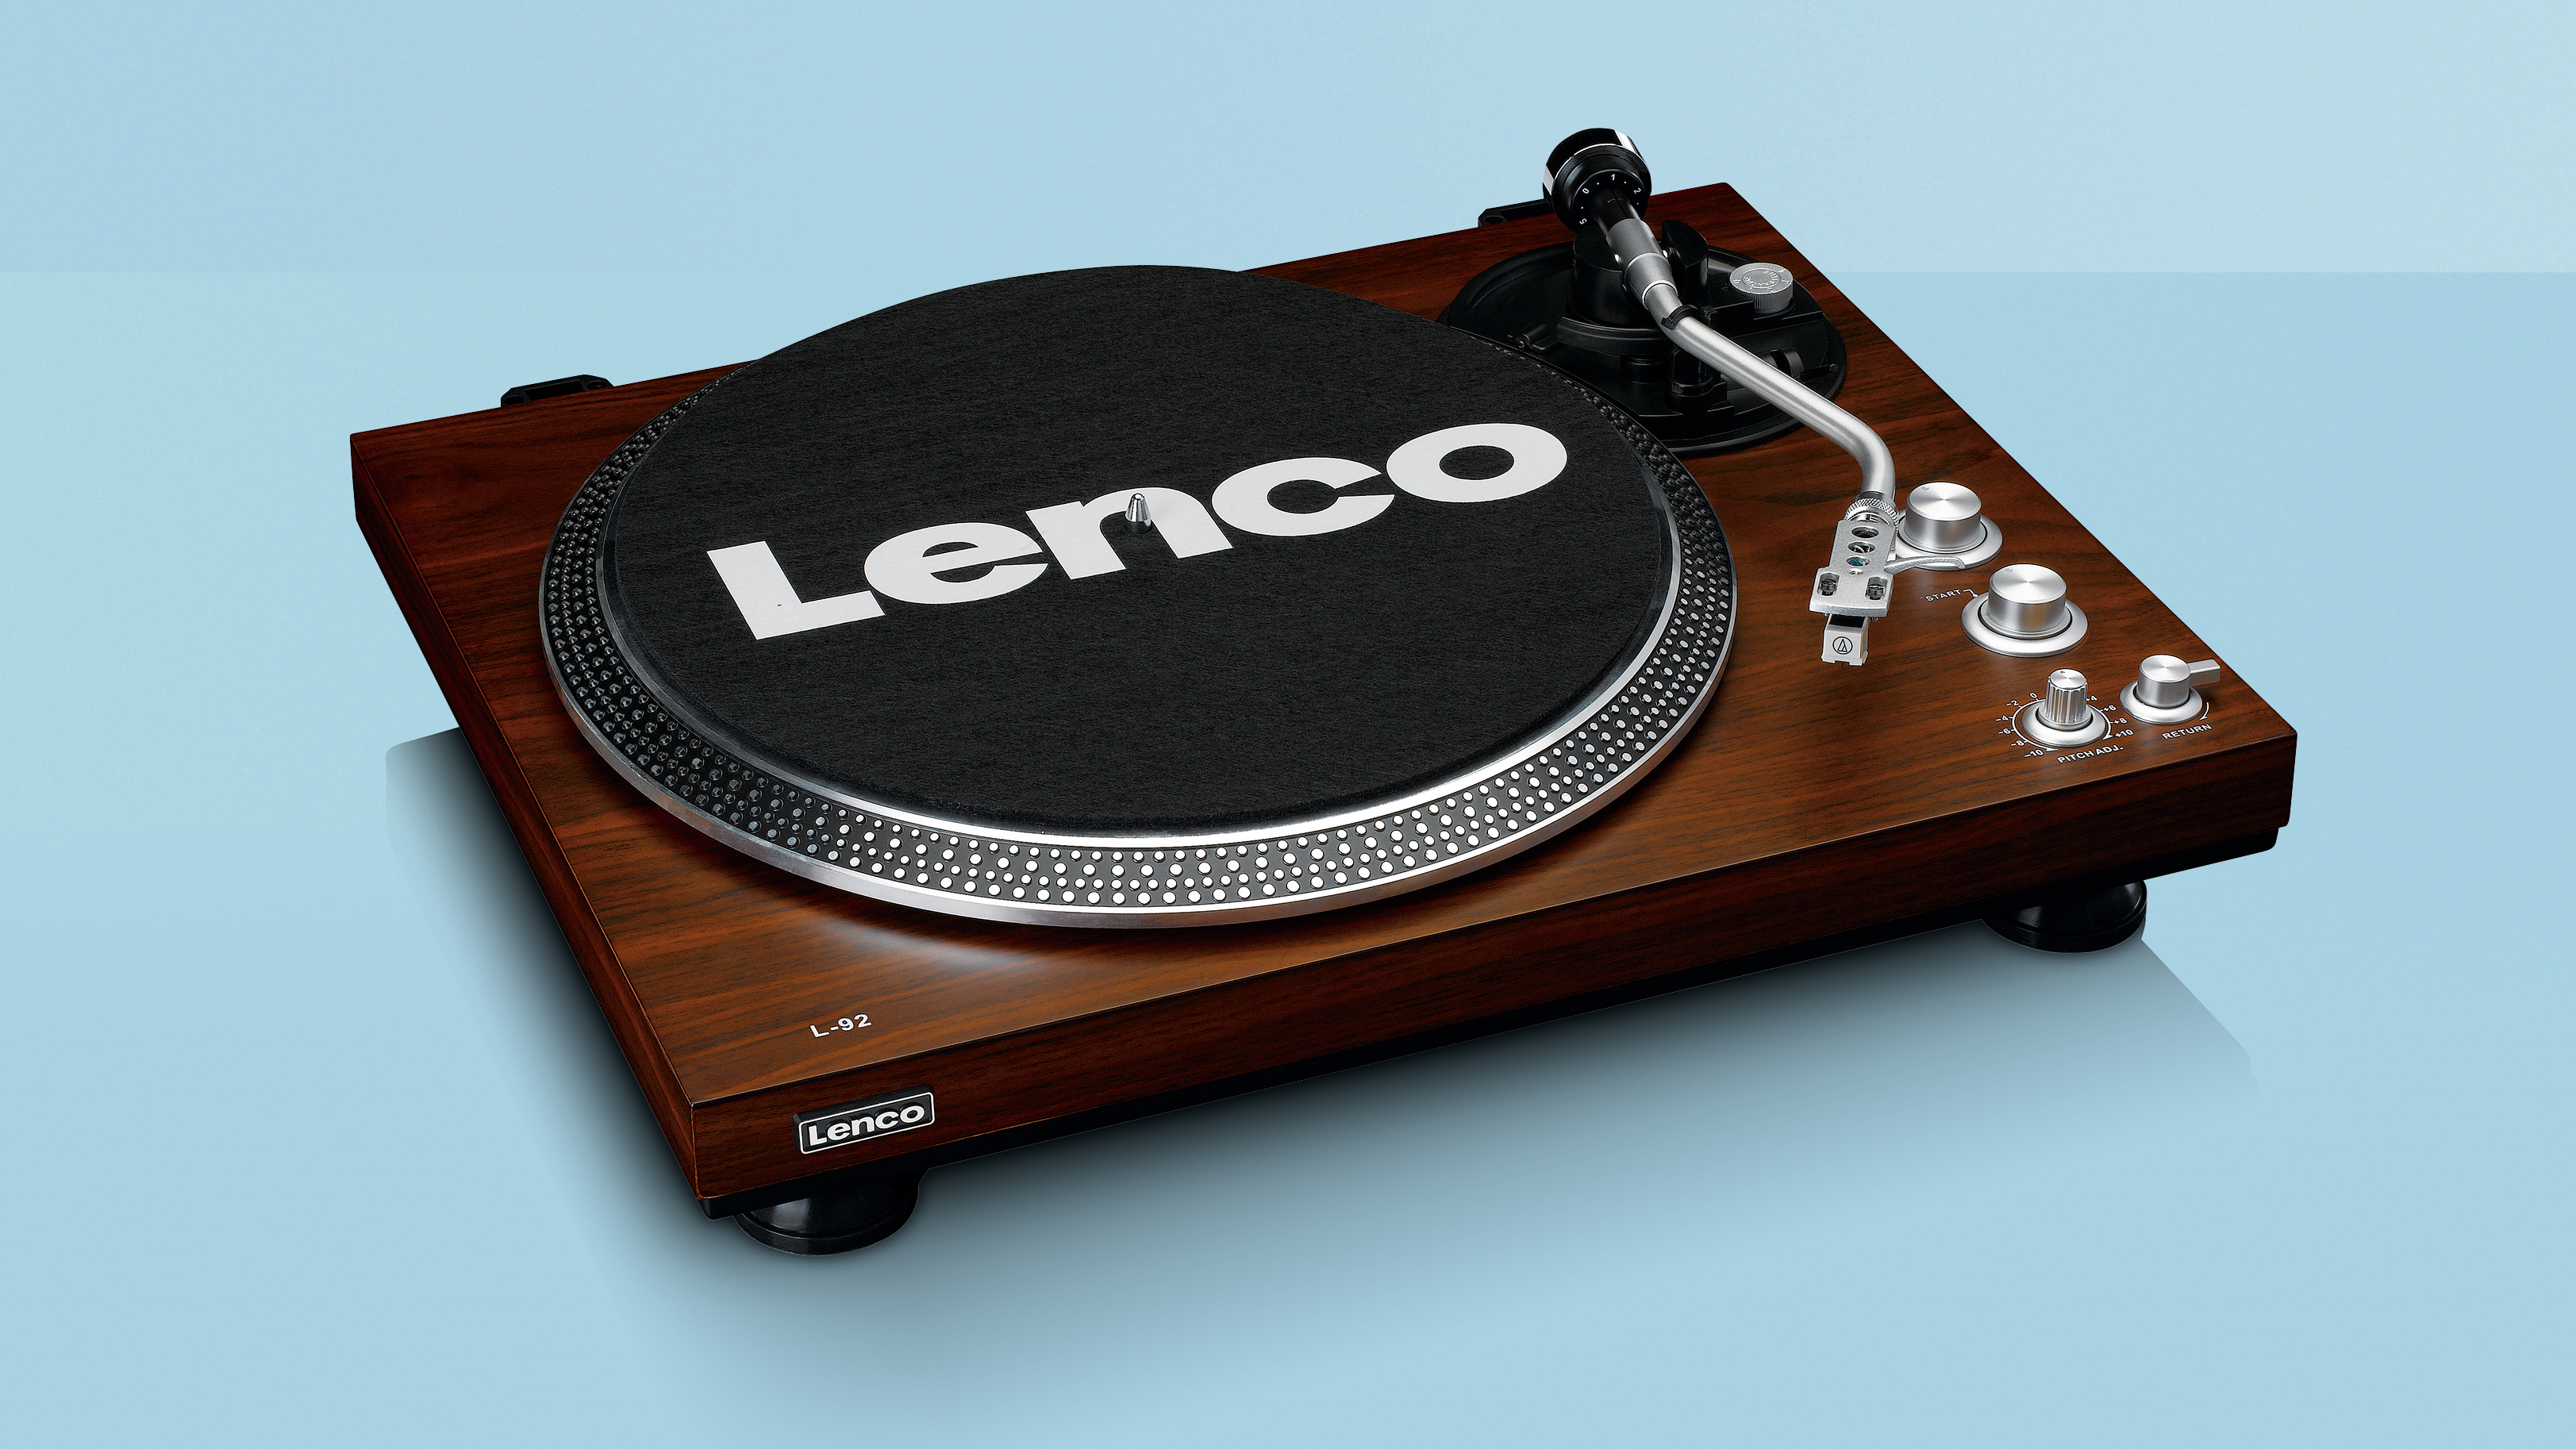 prins chef forvrængning Lenco L-92WA review: a cheap USB turntable that's easy for beginners | T3